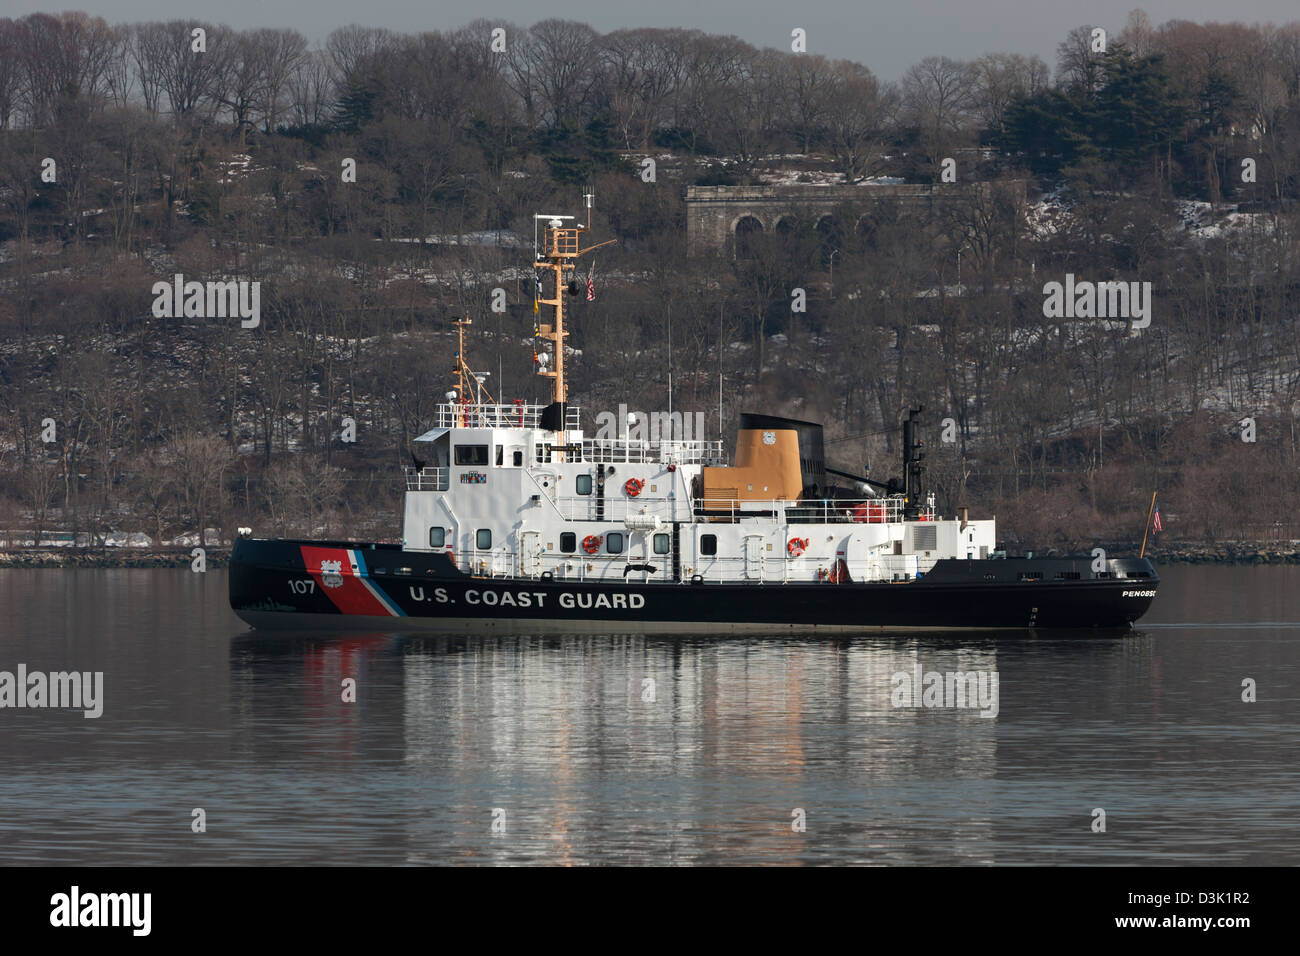 US Coast Guard Cutter Penobscot Bay, a small icebreaker, sits at anchor on the Hudson River, ready for icebreaking duty. Stock Photo